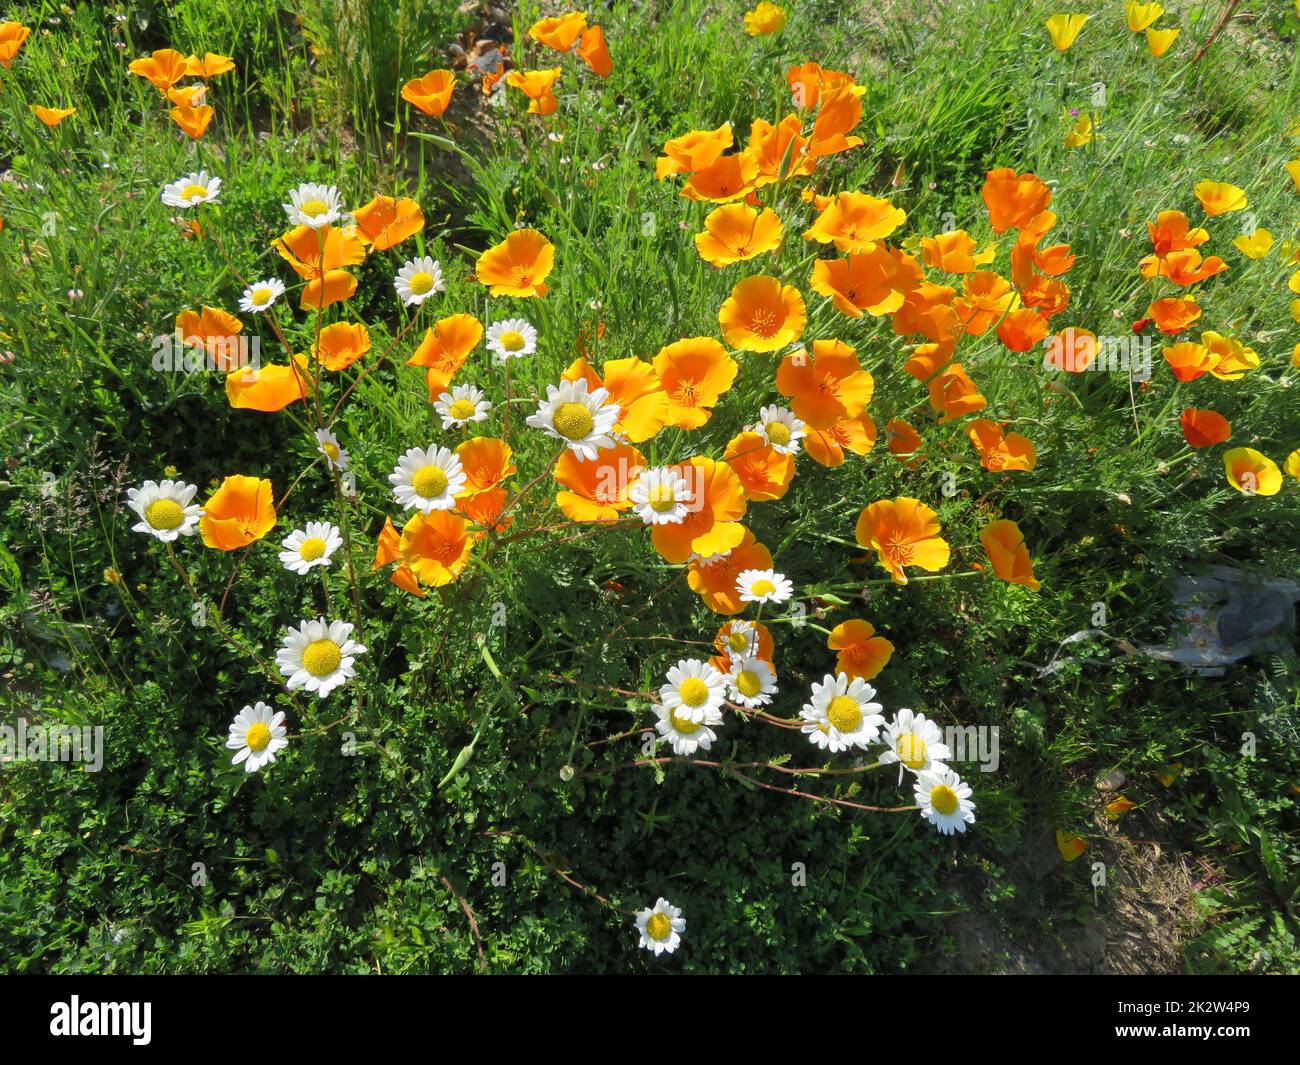 flowers natural plants green landscapes beautiful spring different colors Stock Photo